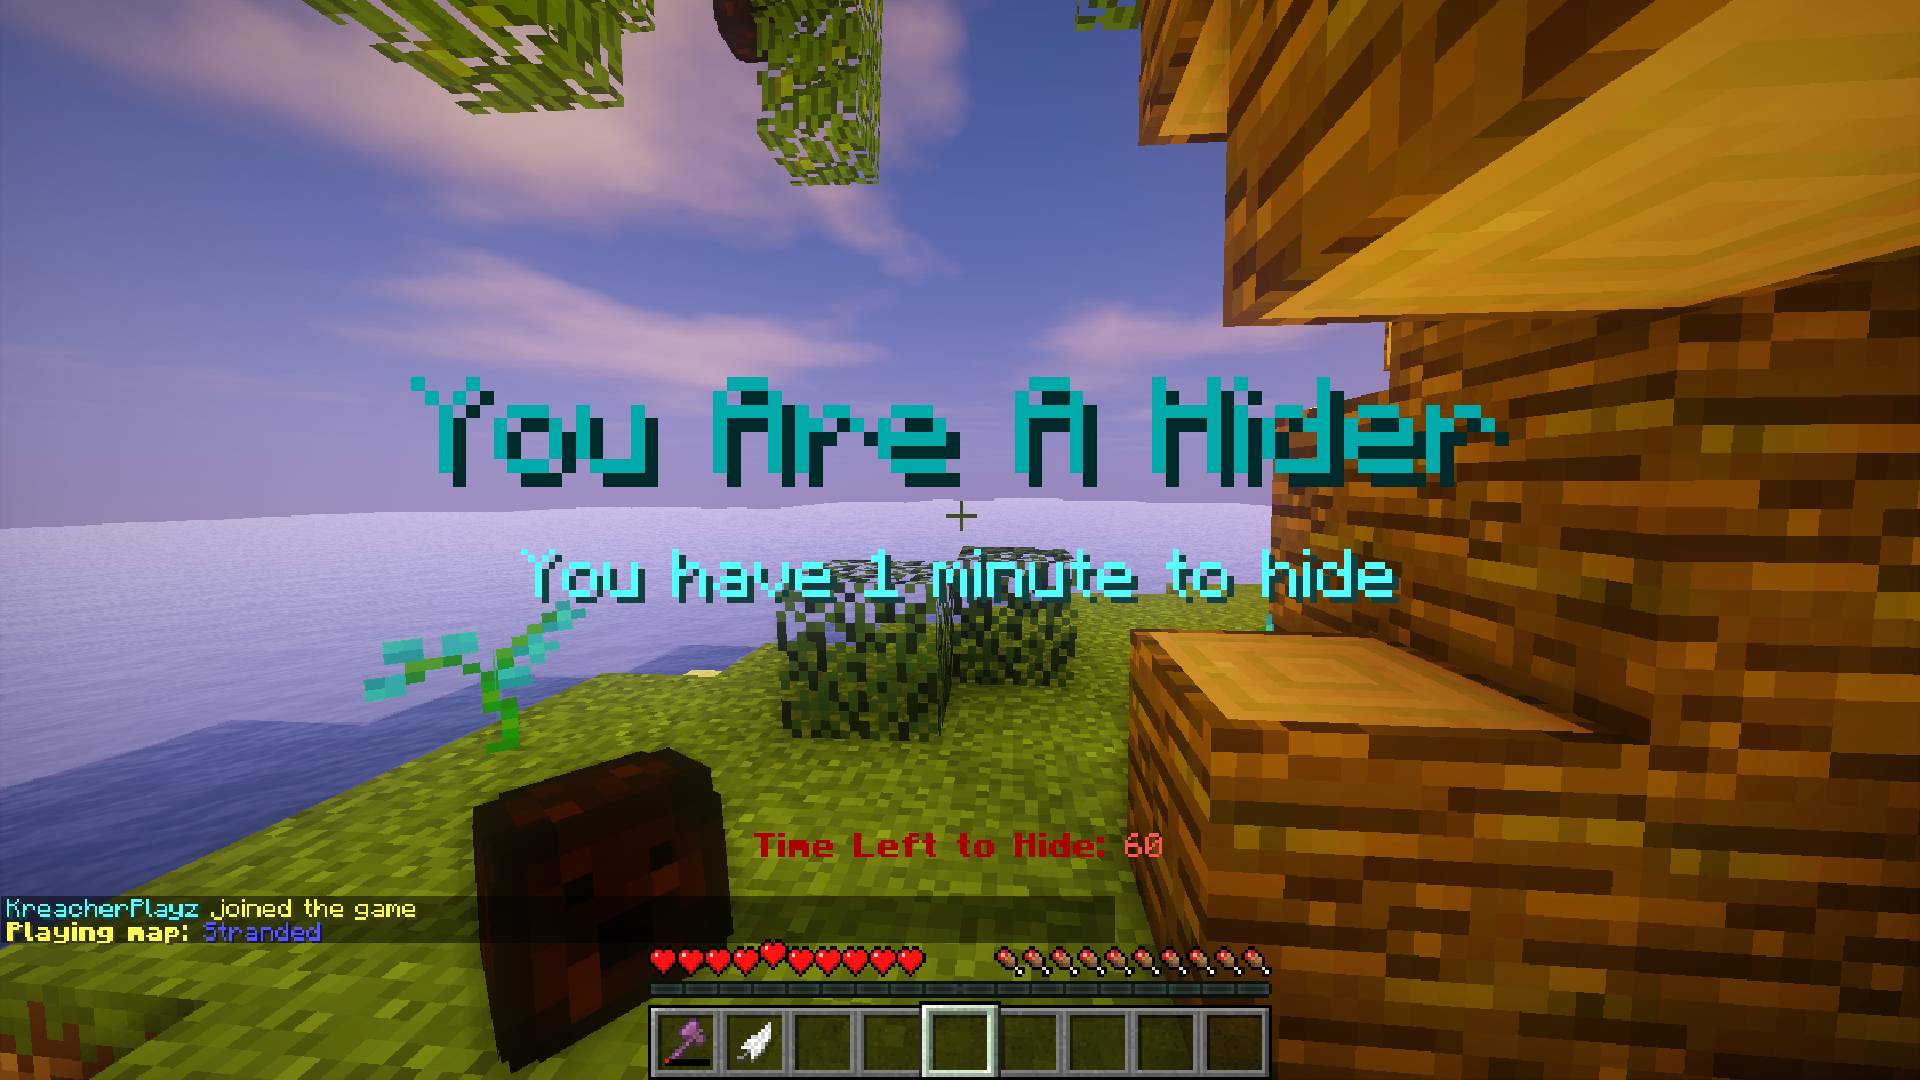 best Minecraft games: a minecraft game of hide and seek is visible, with text saying "you are a hider"